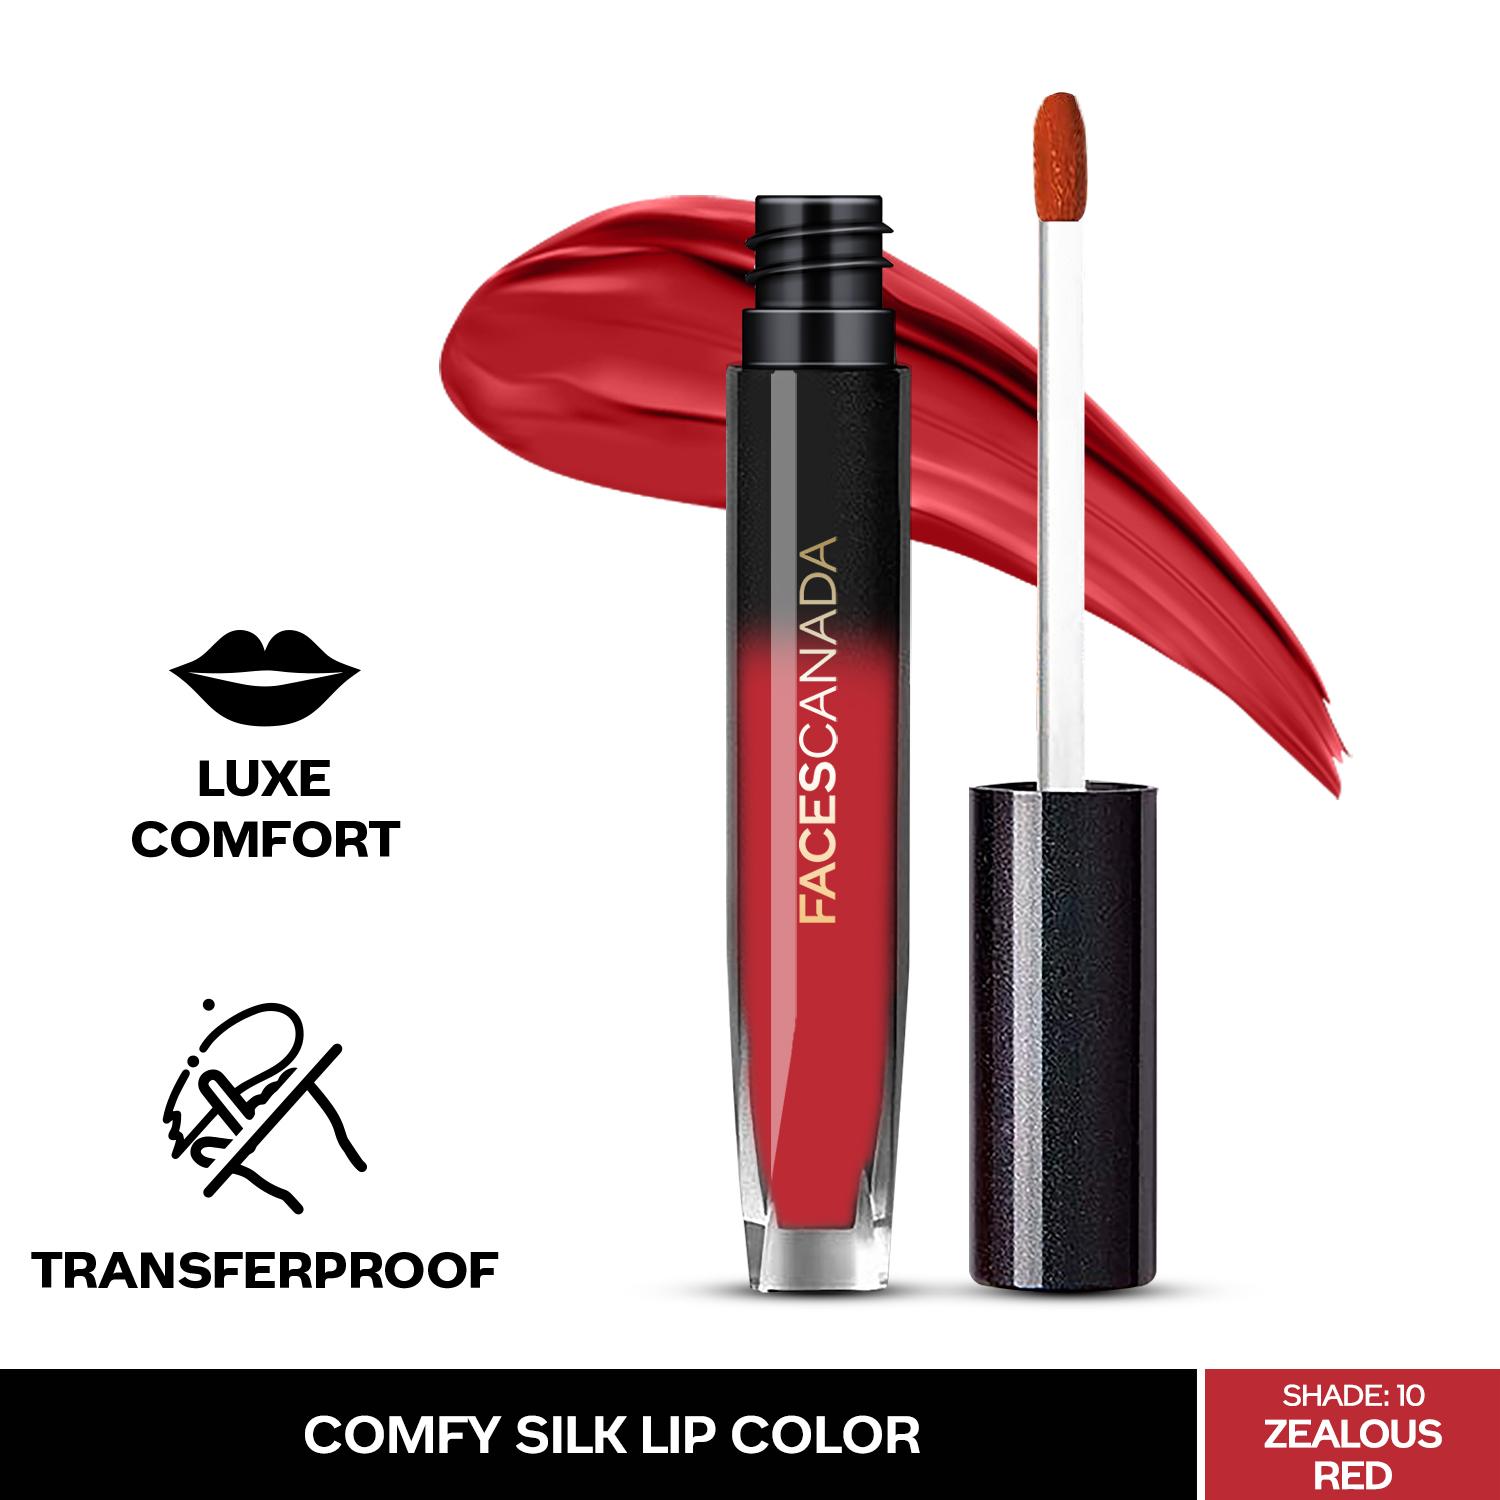 Faces Canada | Faces Canada Comfy Silk Lip Color I Mulberry Oil, Luxe Comfort, No Dryness I Zealous Red 10 (3 ml)